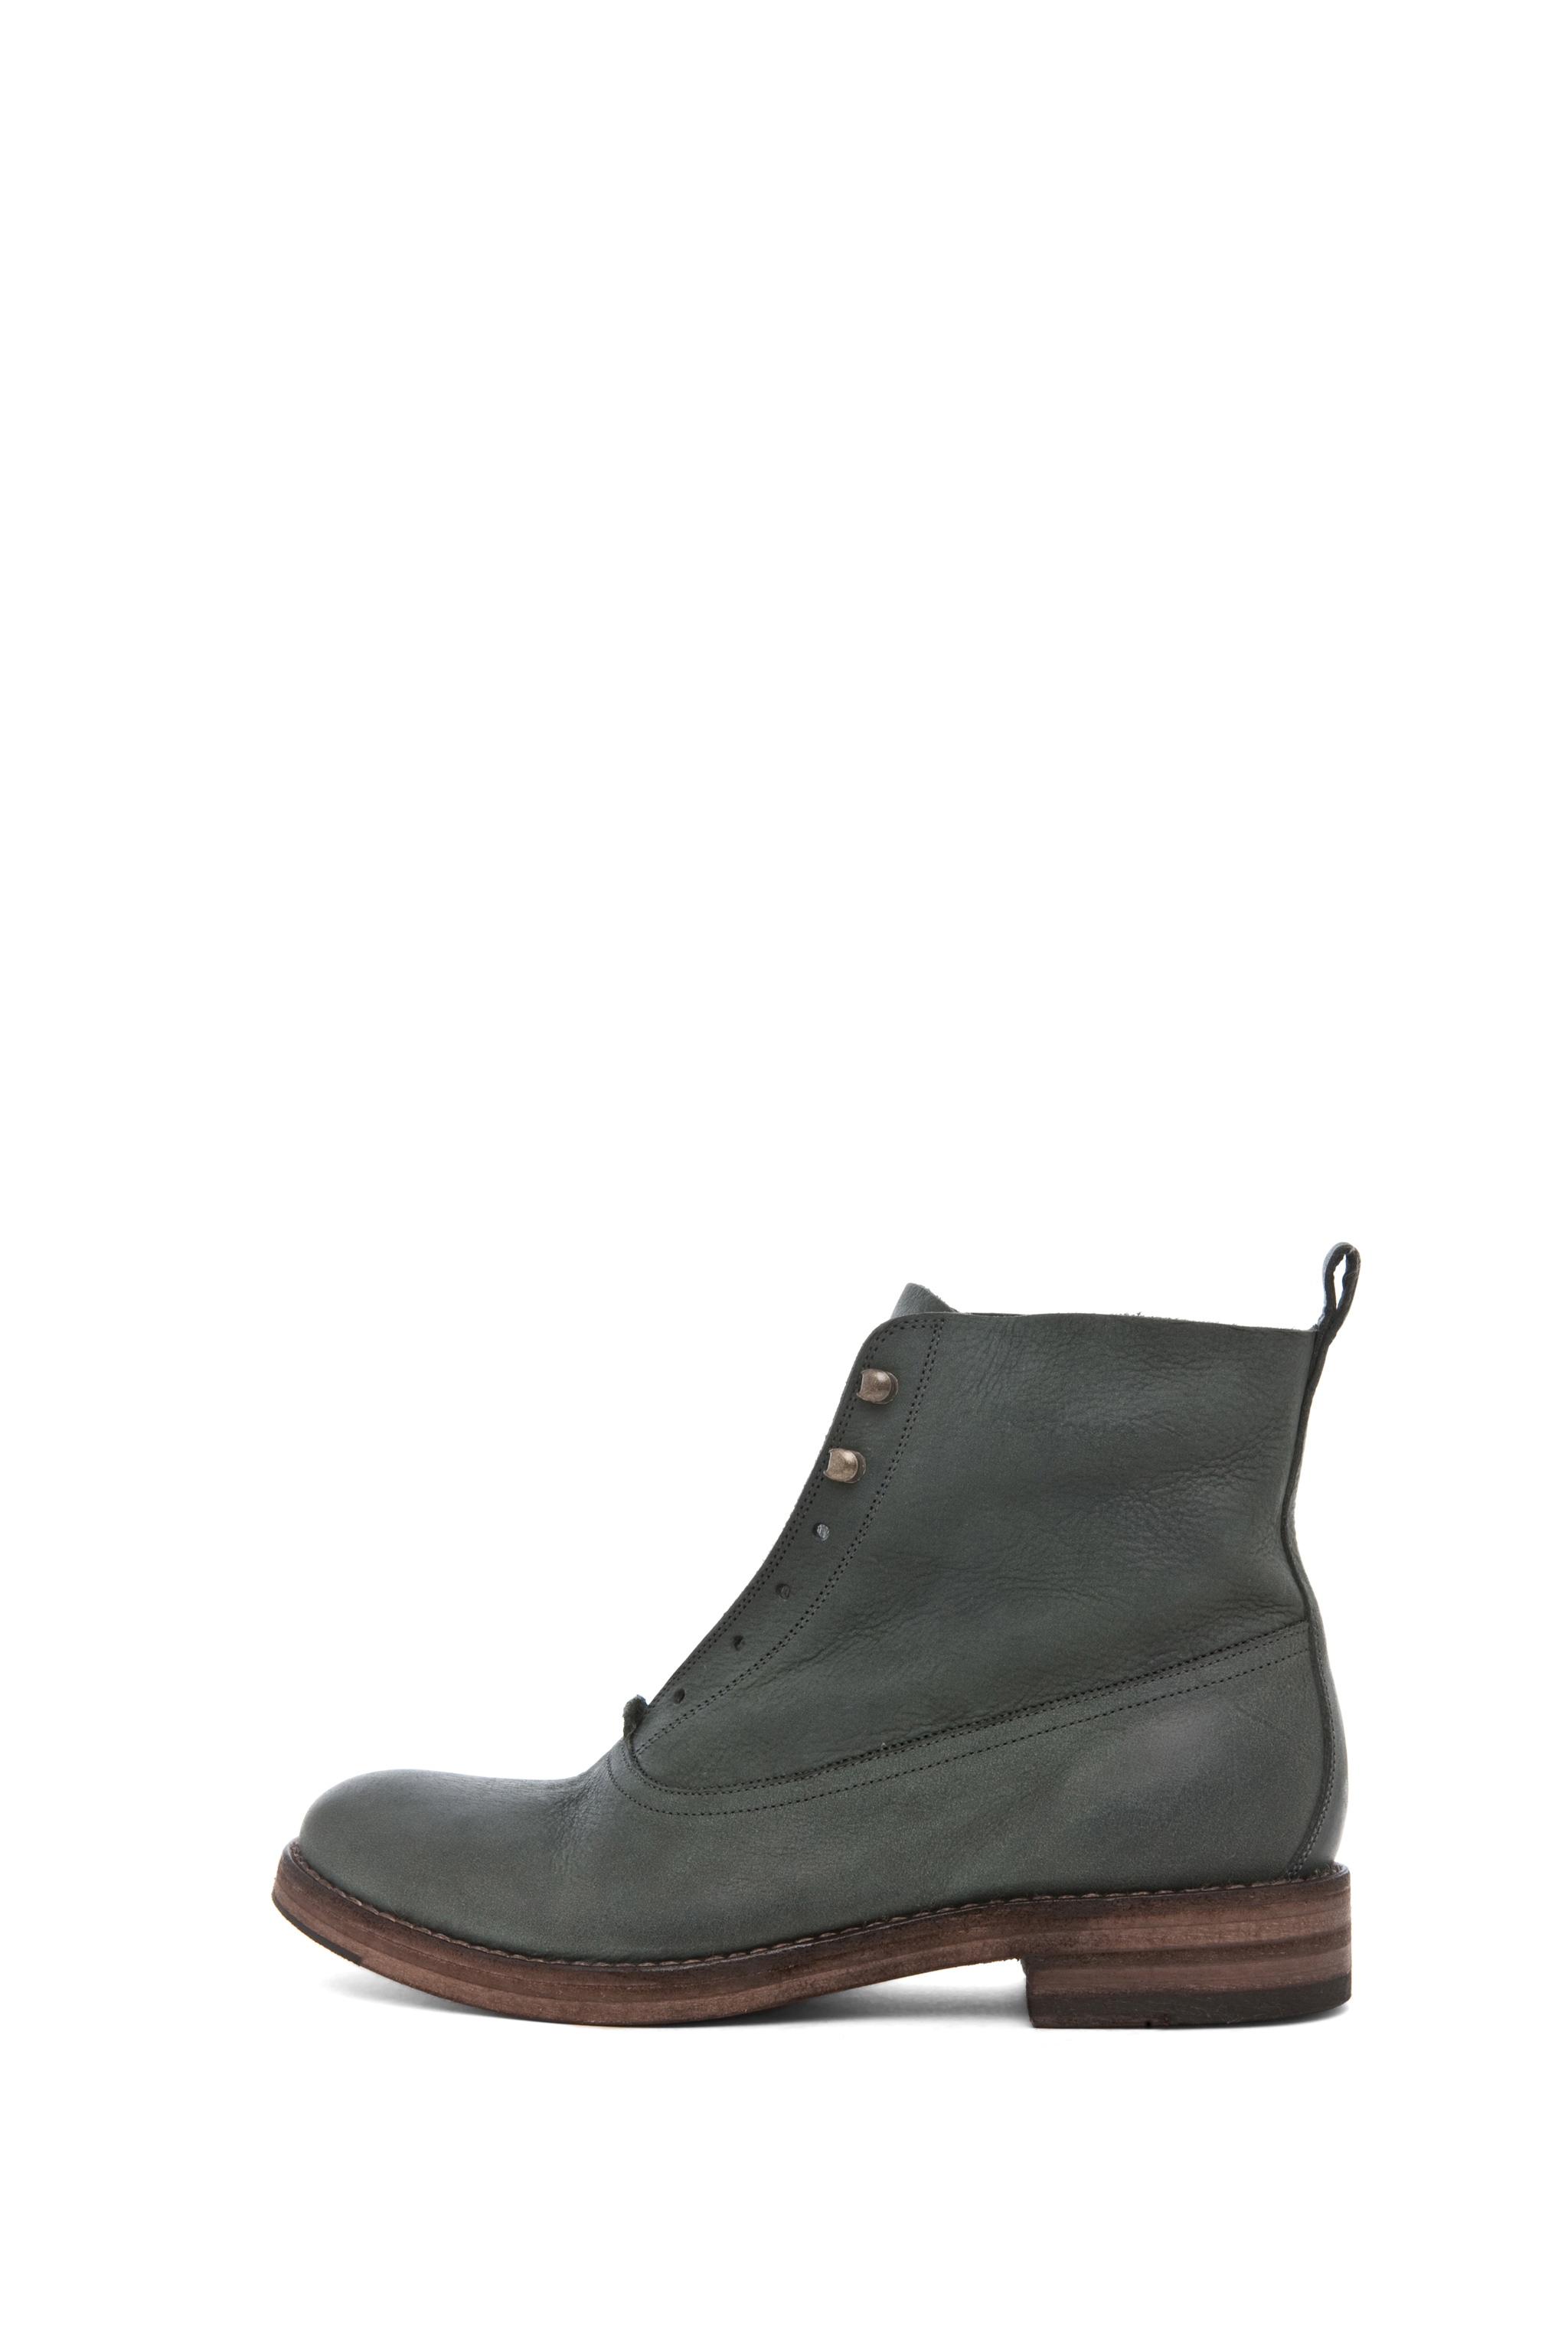 Image 1 of Sartore Pesca Lace Up Bootie in Green